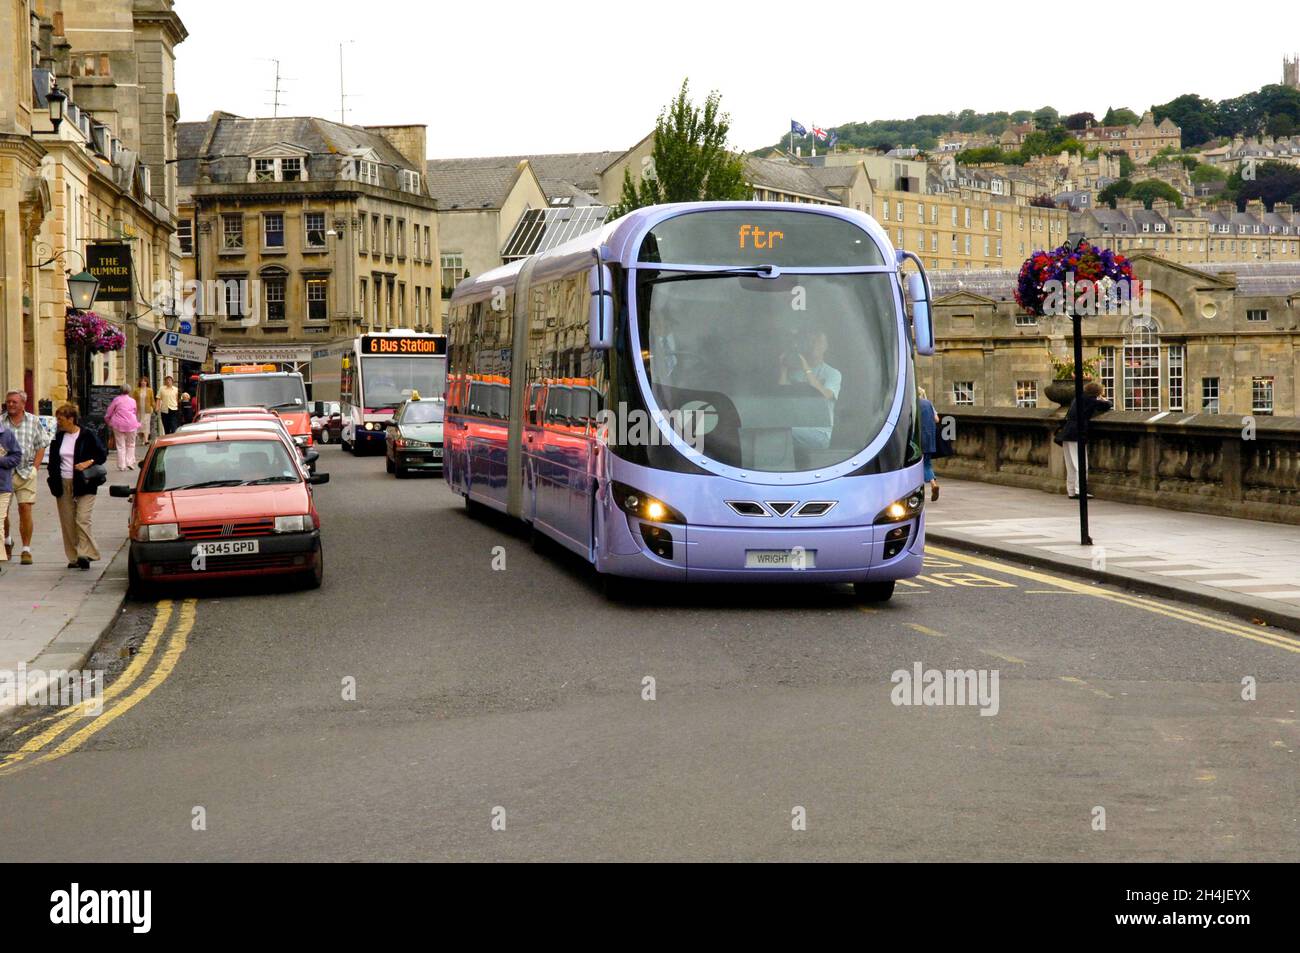 First Group Ftr bus in Bath Stock Photo